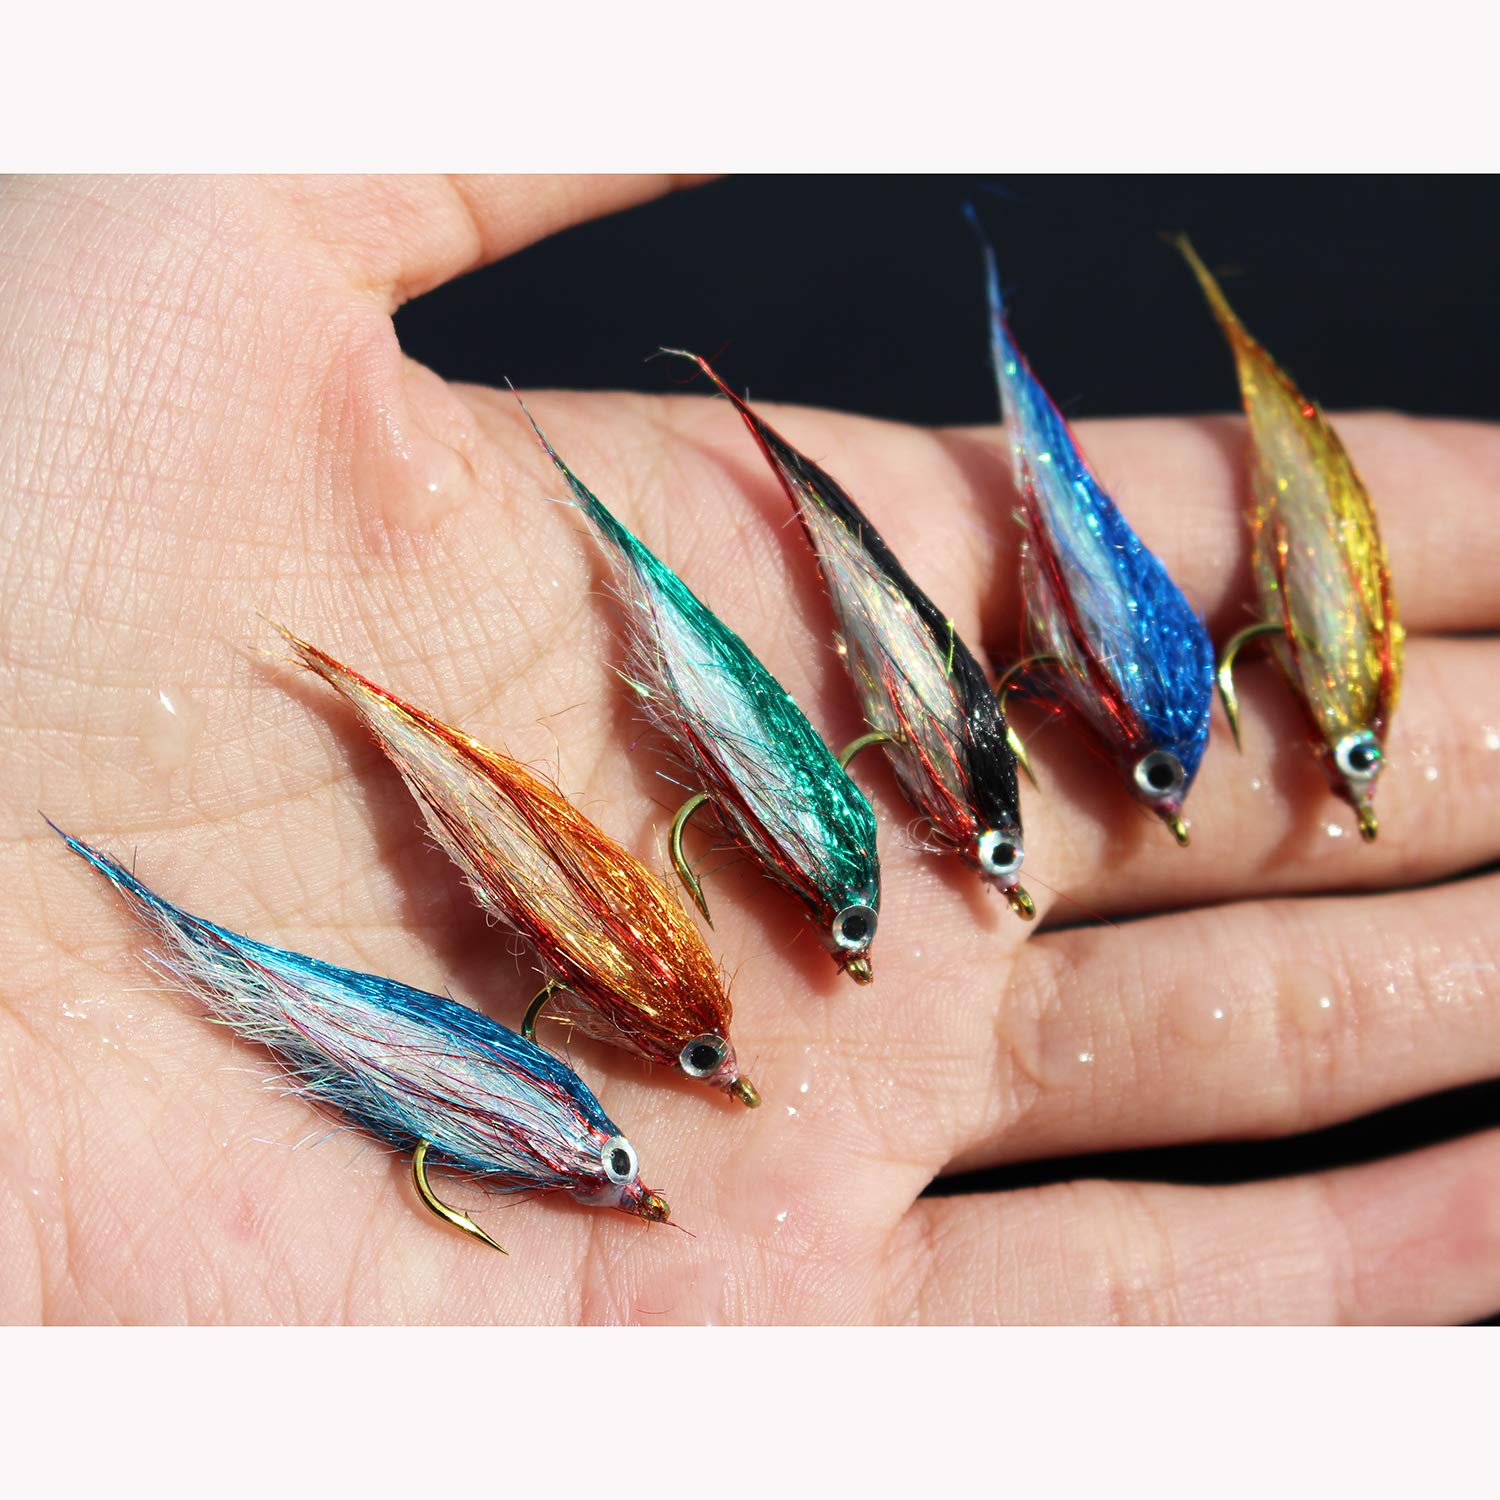 Flying C - Spinning Lures  Tay Salmon Fly: Fishing Flies & Tackle